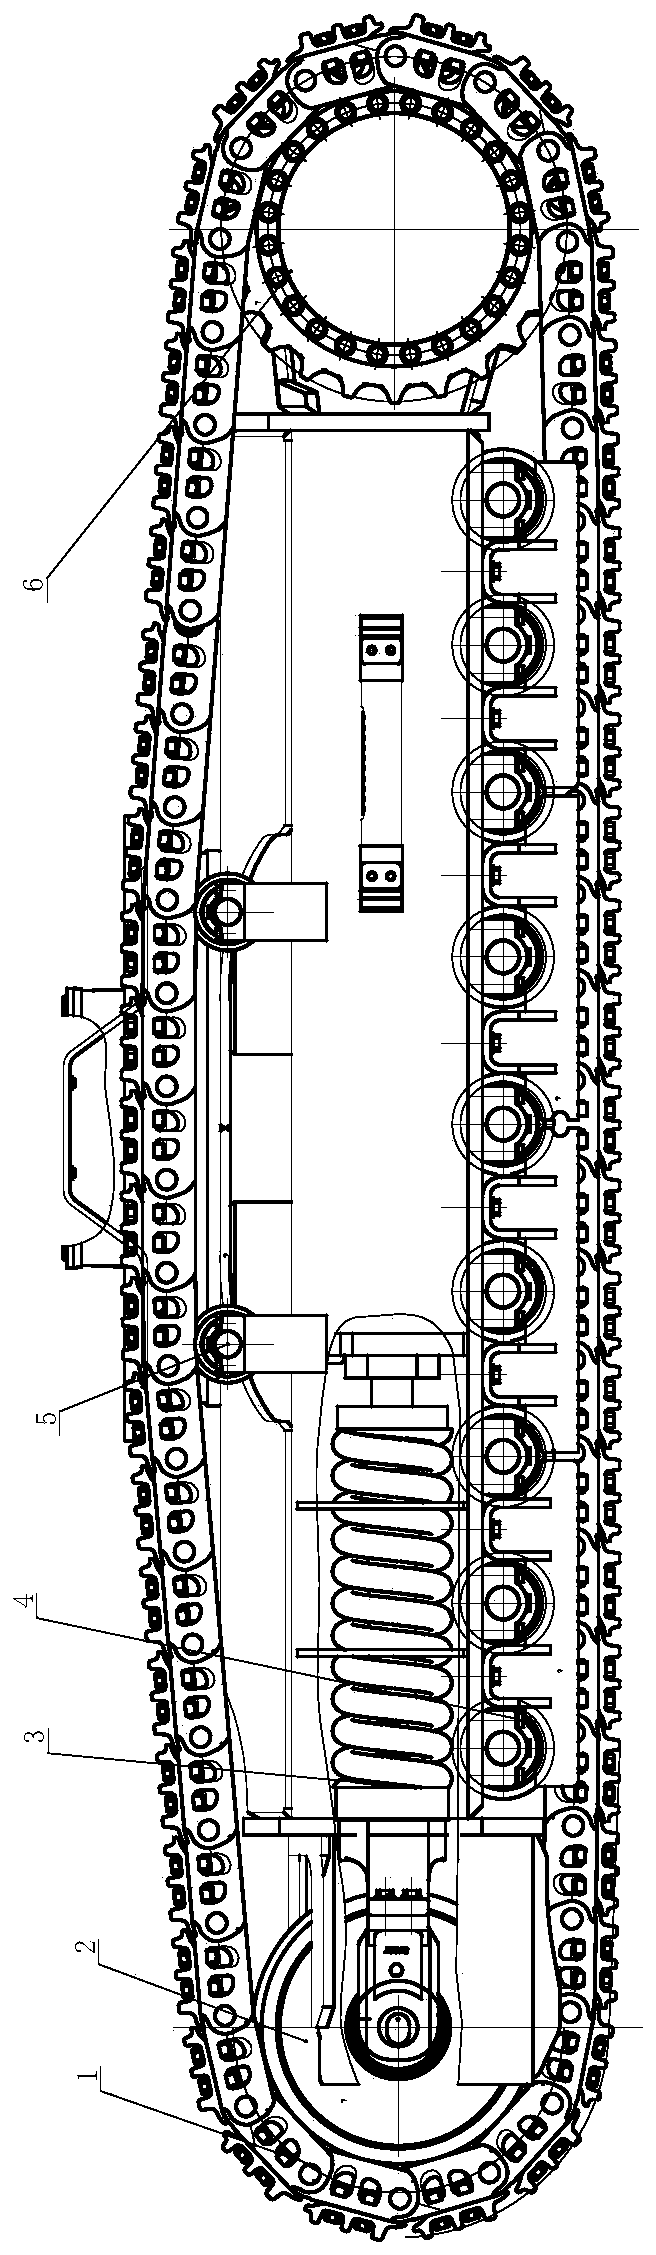 Wheel body internal pressure control system, engineering machinery and control method